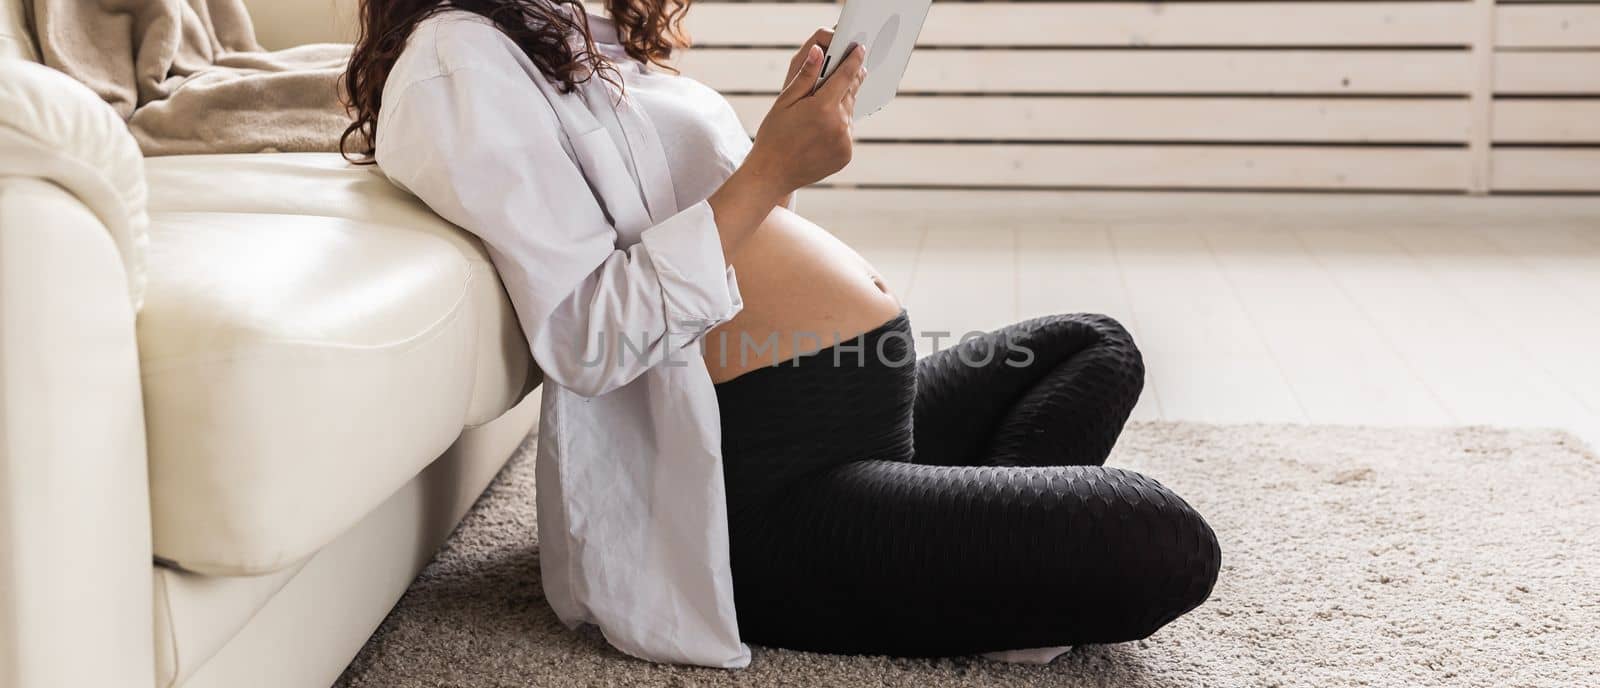 Pregnant woman holding tablet sitting on a carpet near a couch in the living room at home.